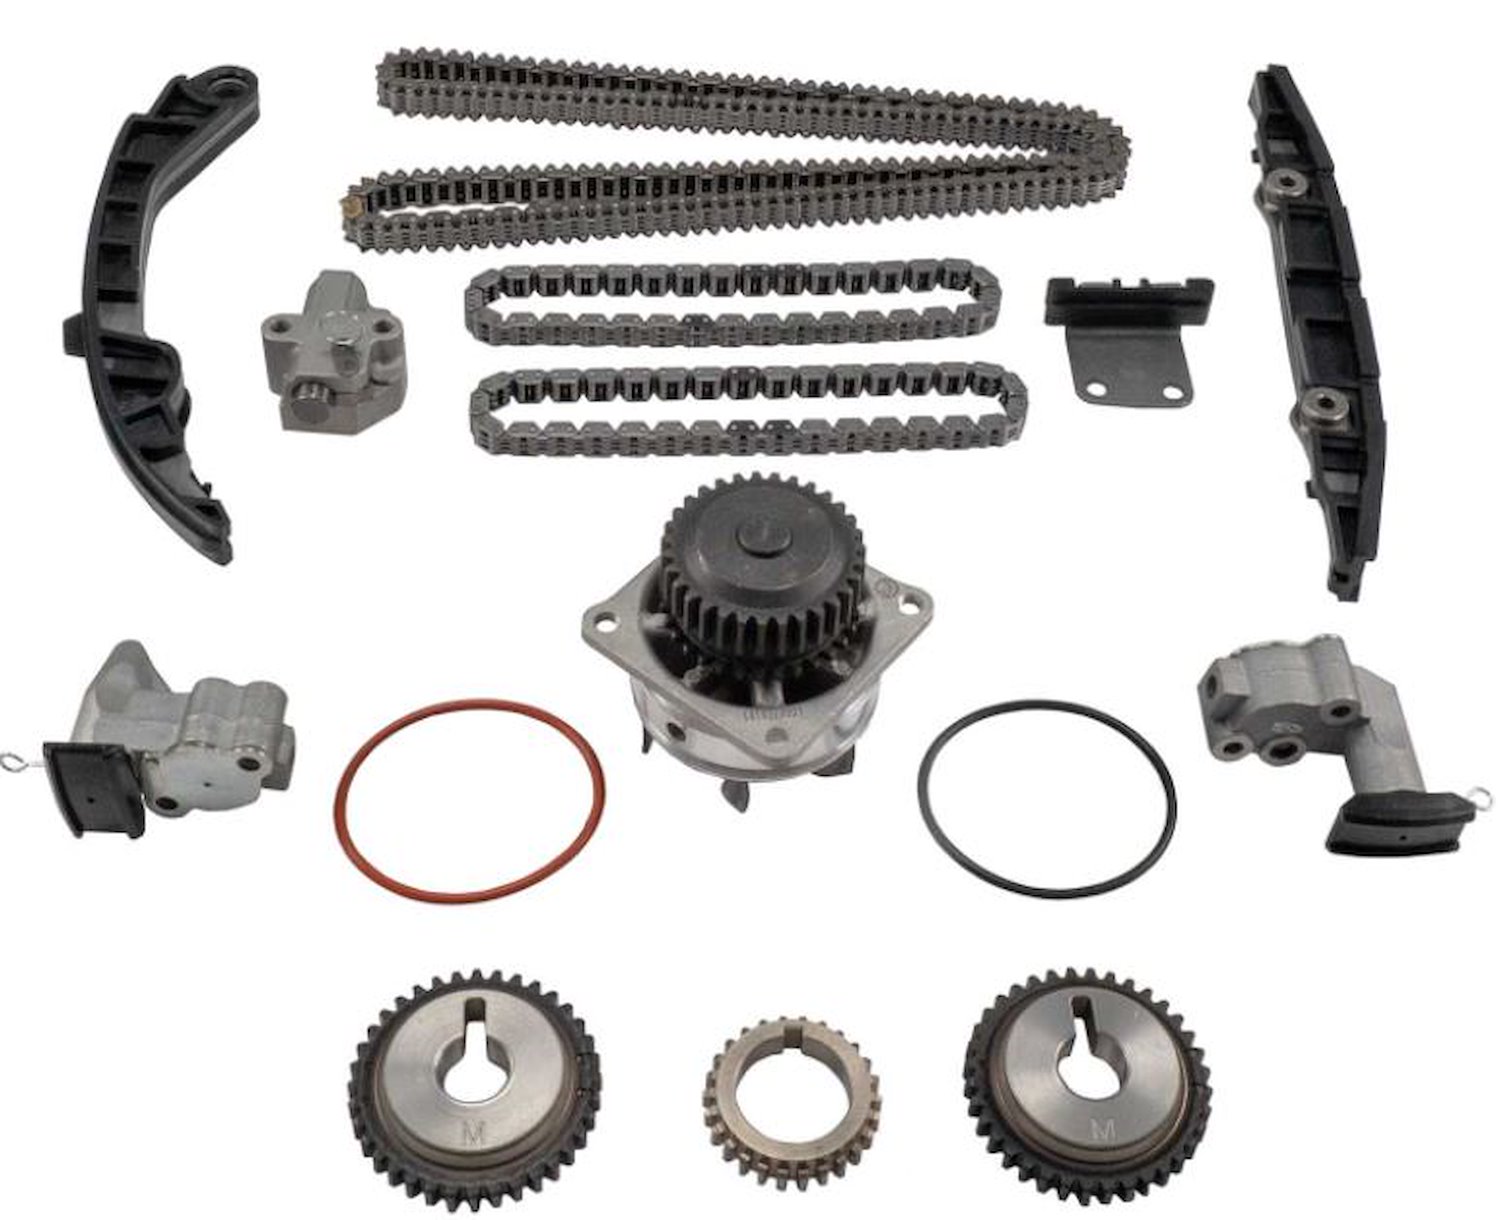 Engine Timing Chain & Water Pump Kit & Water Pump for 2007-2014 Nissan 3.5 VQ35DE V6 DOHC Engine